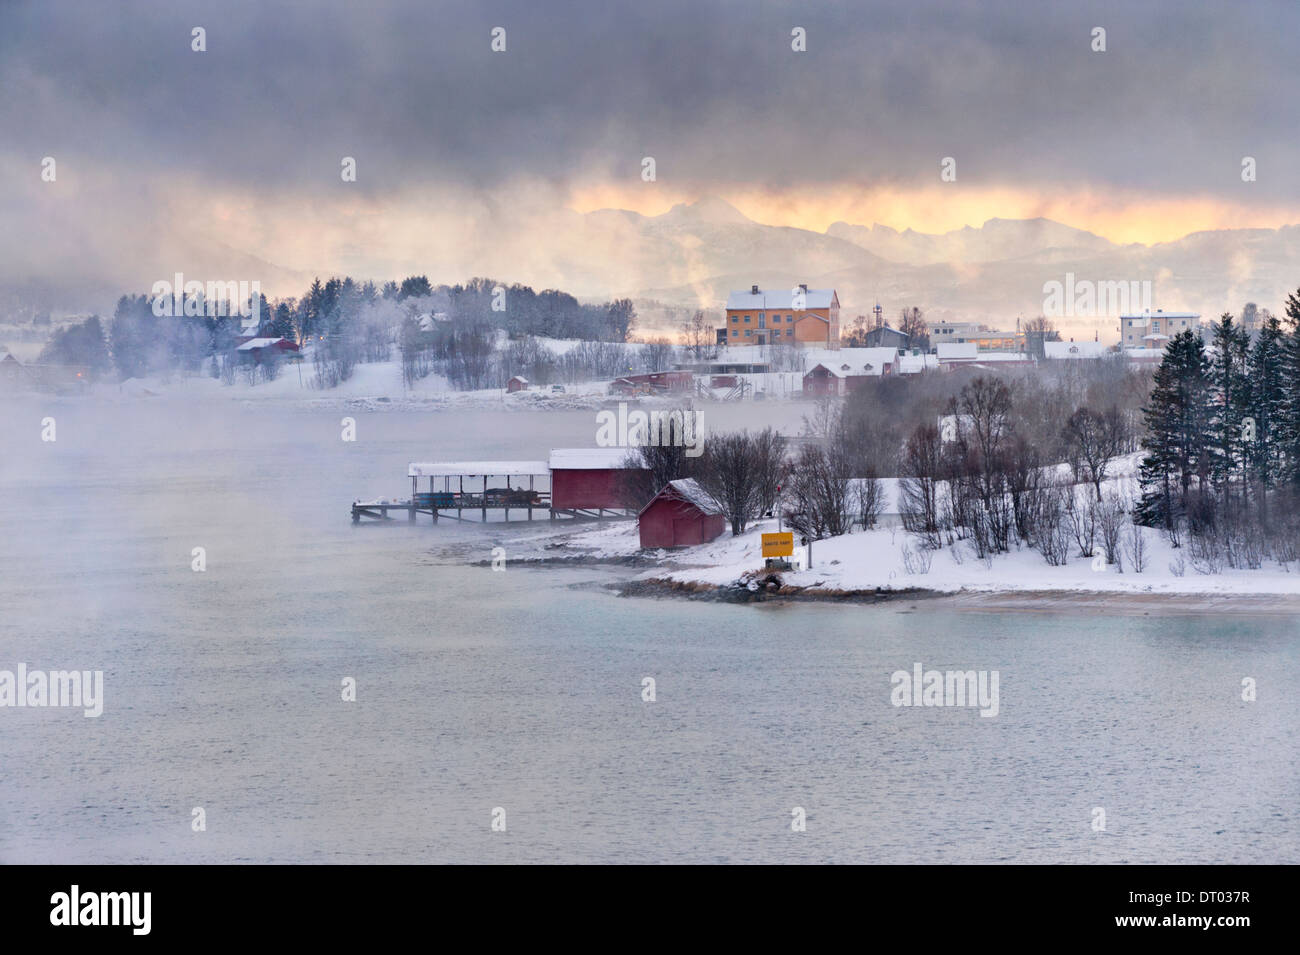 Winter scene of snow and mist on the Norwegian coast near Finnsnes, Troms county, Norway, seen from cruise ship Stock Photo